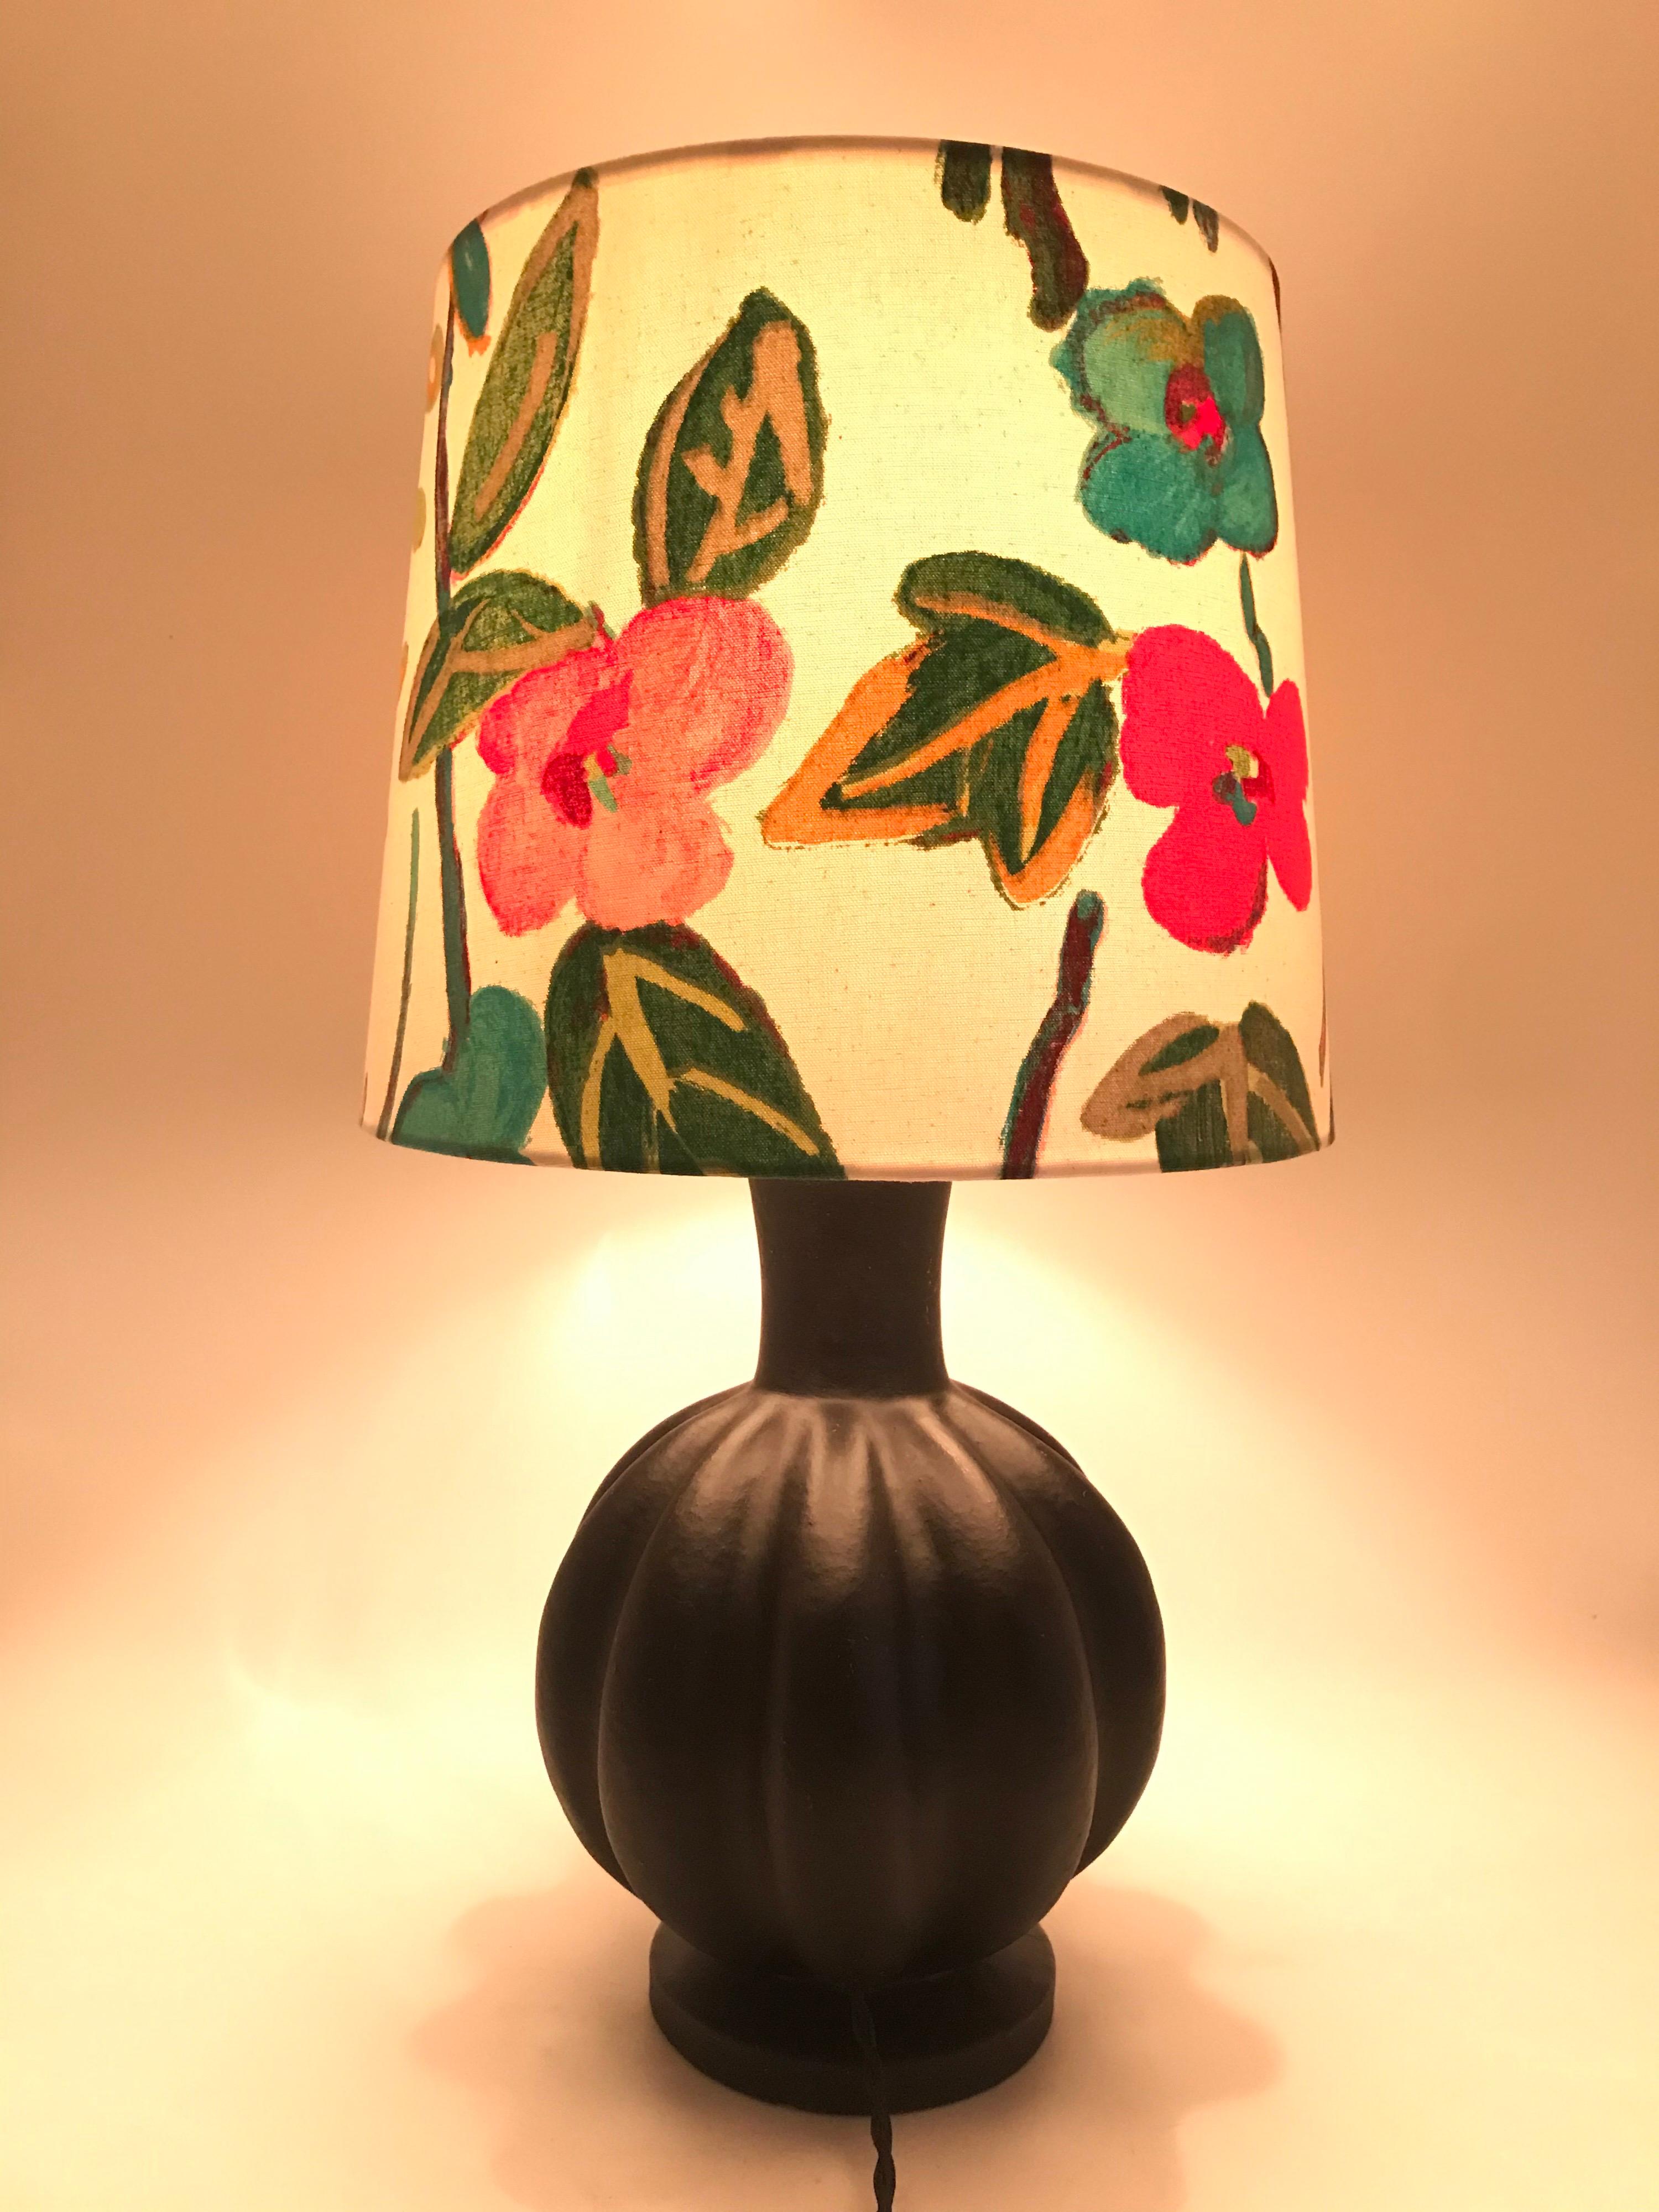 Antique Herman A. Kähler HAK painted pottery lamp from the 1920s
Original label still on the base.
Rewired and ready to plug in.
Can be fitted with a US or EU plug.
One repair to the base.
Shade not included.